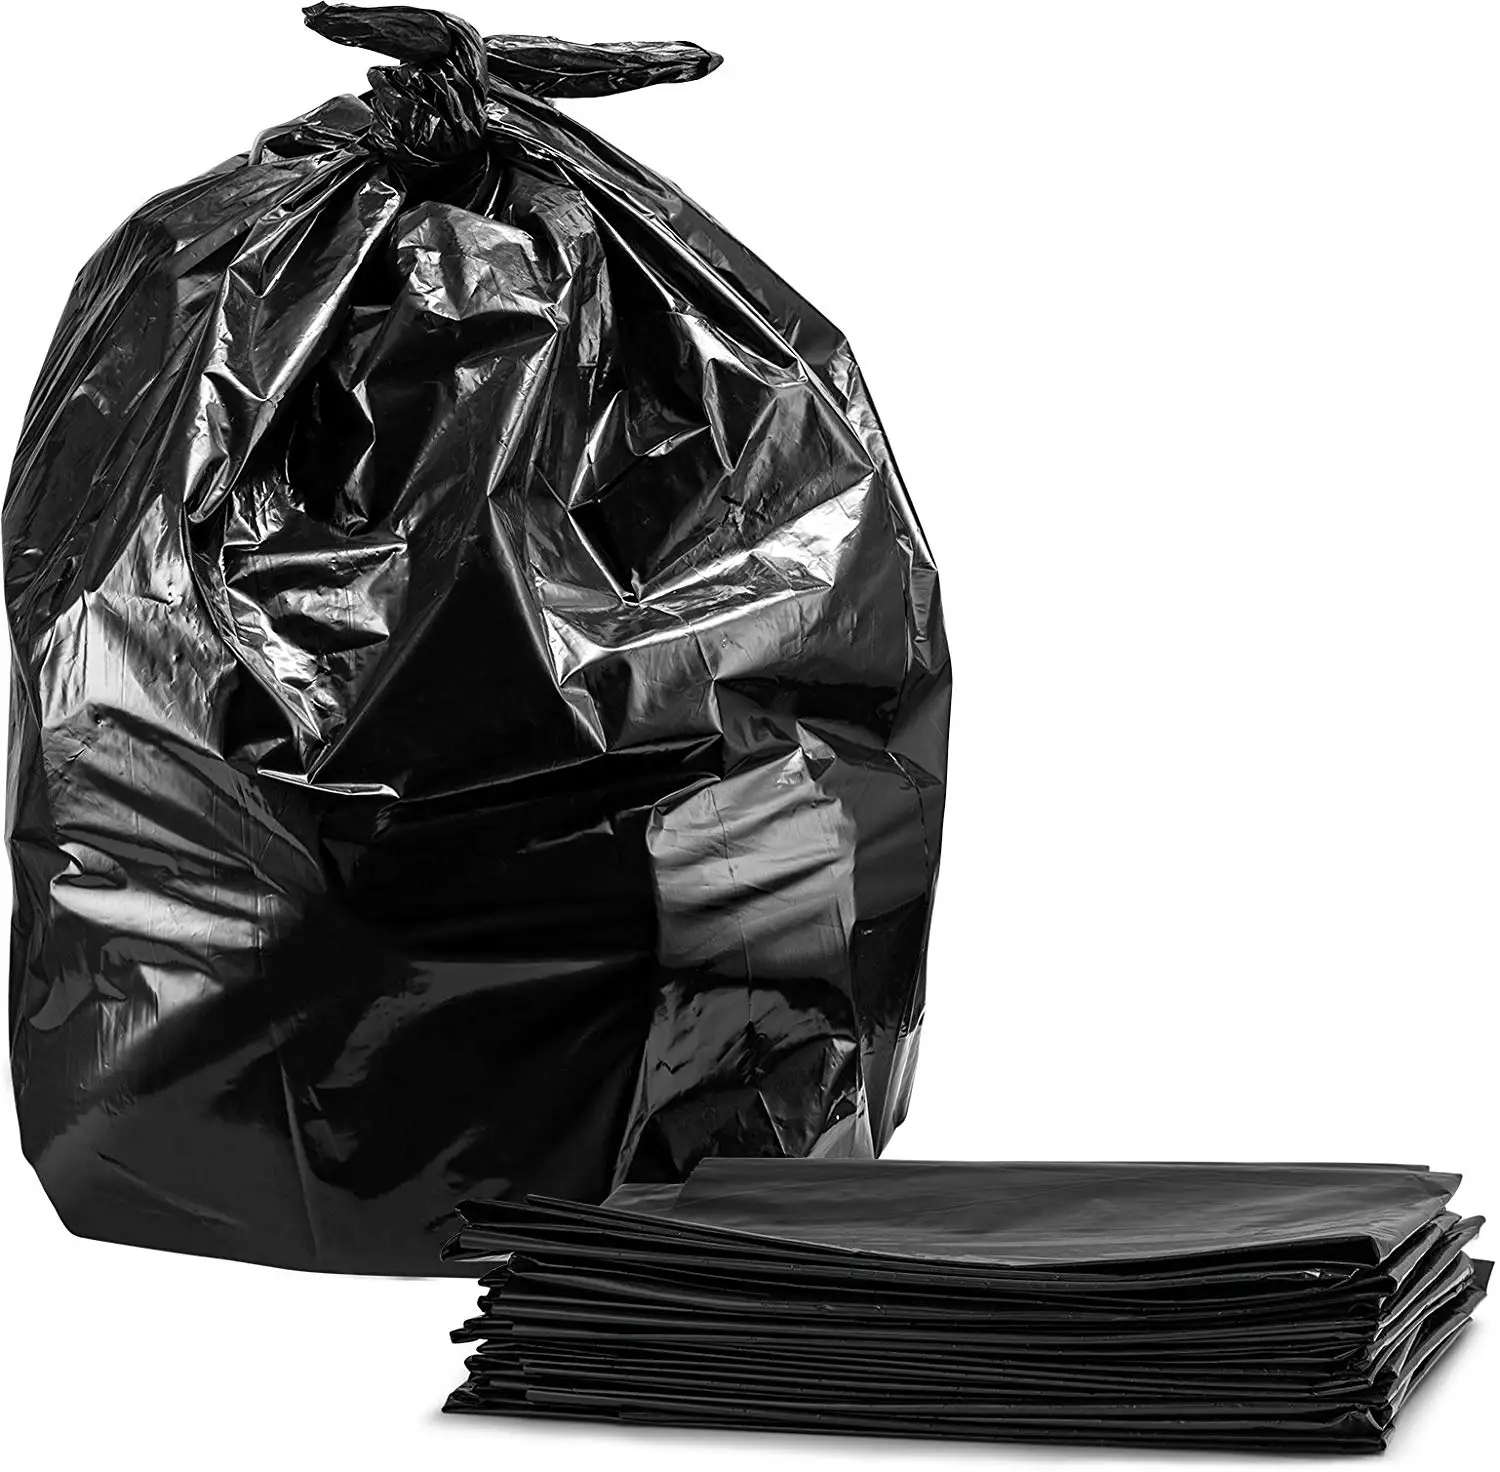 China 55-60 Gallon Heavy Duty Large Outdoor Trash Bags Supplier